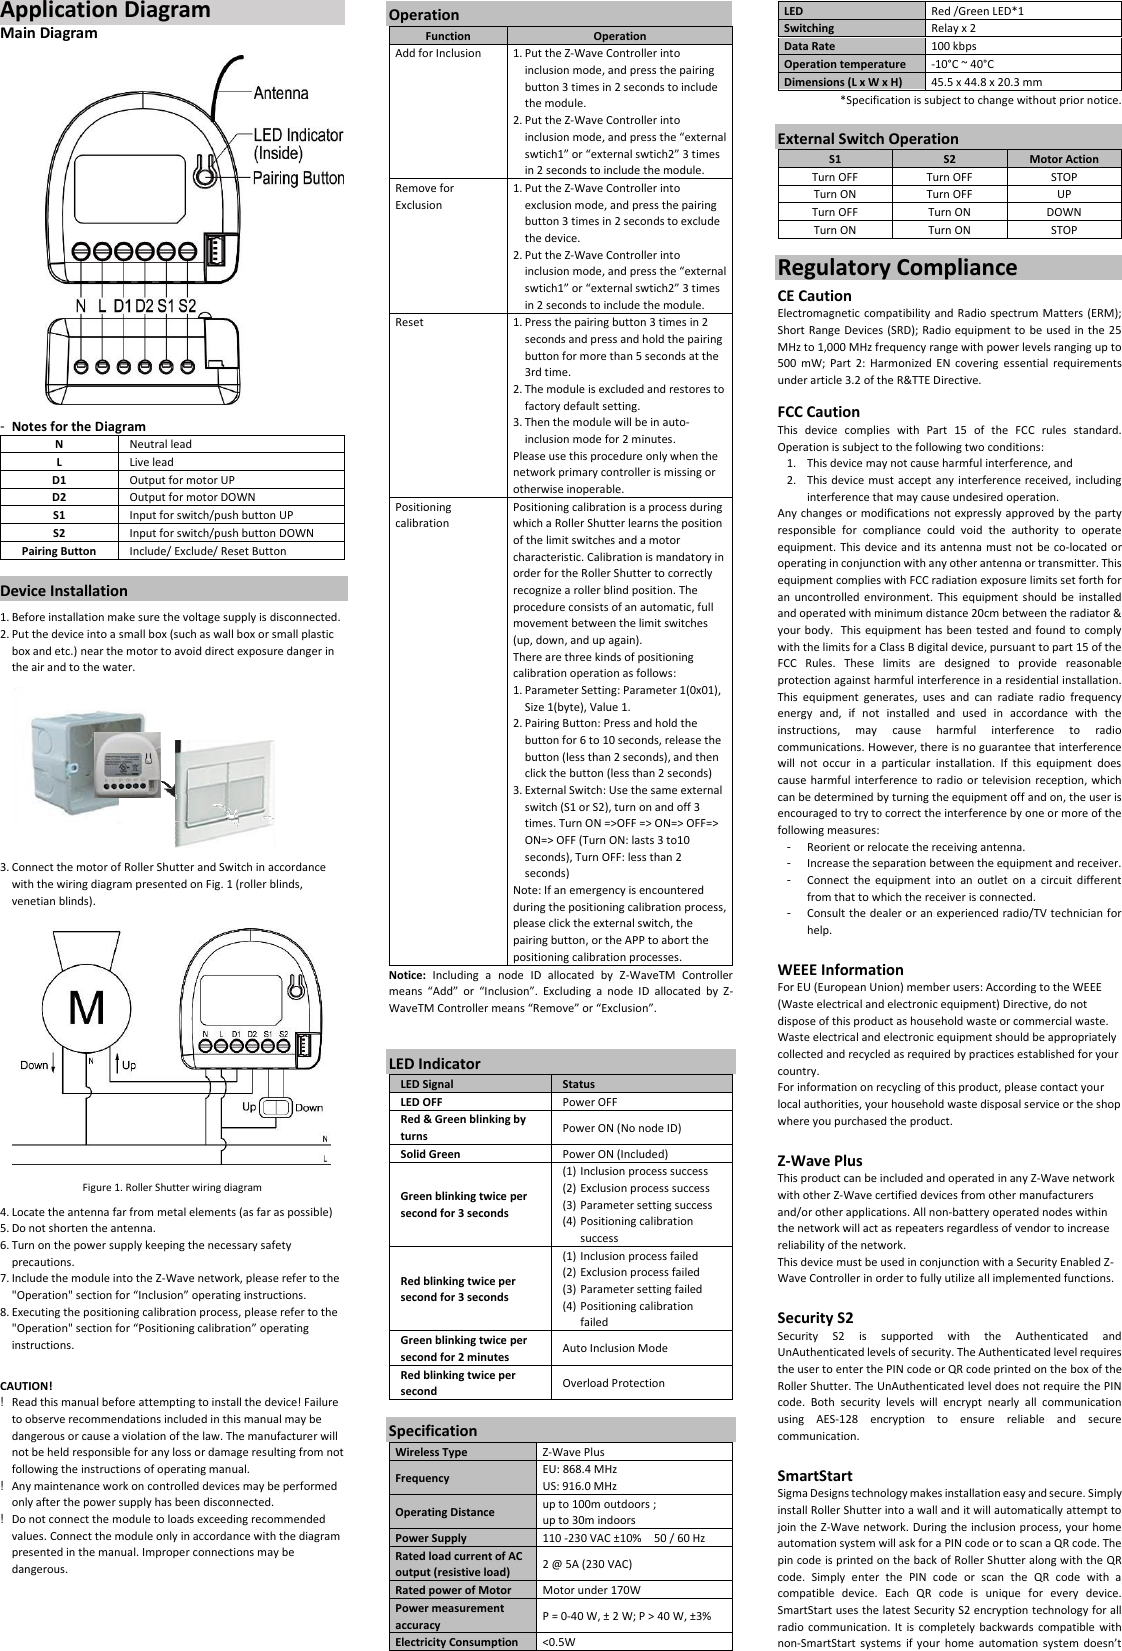 Application Diagram                               Main Diagram  -  Notes for the Diagram N Neutral lead L Live lead D1 Output for motor UP D2 Output for motor DOWN S1 Input for switch/push button UP S2 Input for switch/push button DOWN Pairing Button Include/ Exclude/ Reset Button  Device Installation 1. Before installation make sure the voltage supply is disconnected. 2. Put the device into a small box (such as wall box or small plastic box and etc.) near the motor to avoid direct exposure danger in the air and to the water.            3. Connect the motor of Roller Shutter and Switch in accordance with the wiring diagram presented on Fig. 1 (roller blinds, venetian blinds).  Figure 1. Roller Shutter wiring diagram 4. Locate the antenna far from metal elements (as far as possible) 5. Do not shorten the antenna. 6. Turn on the power supply keeping the necessary safety precautions. 7. Include the module into the Z-Wave network, please refer to the &quot;Operation&quot; section for “Inclusion” operating instructions. 8. Executing the positioning calibration process, please refer to the &quot;Operation&quot; section for “Positioning calibration” operating instructions.  CAUTION! !  Read this manual before attempting to install the device! Failure to observe recommendations included in this manual may be dangerous or cause a violation of the law. The manufacturer will not be held responsible for any loss or damage resulting from not following the instructions of operating manual. !  Any maintenance work on controlled devices may be performed only after the power supply has been disconnected. !  Do not connect the module to loads exceeding recommended values. Connect the module only in accordance with the diagram presented in the manual. Improper connections may be dangerous.    Operation Function Operation Add for Inclusion 1. Put the Z-Wave Controller into inclusion mode, and press the pairing button 3 times in 2 seconds to include the module. 2. Put the Z-Wave Controller into inclusion mode, and press the “external swtich1” or “external swtich2” 3 times in 2 seconds to include the module. Remove for Exclusion 1. Put the Z-Wave Controller into exclusion mode, and press the pairing button 3 times in 2 seconds to exclude the device. 2. Put the Z-Wave Controller into inclusion mode, and press the “external swtich1” or “external swtich2” 3 times in 2 seconds to include the module. Reset 1. Press the pairing button 3 times in 2 seconds and press and hold the pairing button for more than 5 seconds at the 3rd time. 2. The module is excluded and restores to factory default setting. 3. Then the module will be in auto-inclusion mode for 2 minutes. Please use this procedure only when the network primary controller is missing or otherwise inoperable. Positioning calibration Positioning calibration is a process during which a Roller Shutter learns the position of the limit switches and a motor characteristic. Calibration is mandatory in order for the Roller Shutter to correctly recognize a roller blind position. The procedure consists of an automatic, full movement between the limit switches (up, down, and up again). There are three kinds of positioning calibration operation as follows: 1. Parameter Setting: Parameter 1(0x01), Size 1(byte), Value 1. 2. Pairing Button: Press and hold the button for 6 to 10 seconds, release the button (less than 2 seconds), and then click the button (less than 2 seconds) 3. External Switch: Use the same external switch (S1 or S2), turn on and off 3 times. Turn ON =&gt;OFF =&gt; ON=&gt; OFF=&gt; ON=&gt; OFF (Turn ON: lasts 3 to10 seconds), Turn OFF: less than 2 seconds) Note: If an emergency is encountered during the positioning calibration process, please click the external switch, the pairing button, or the APP to abort the positioning calibration processes. Notice:  Including  a  node  ID  allocated  by  Z-WaveTM  Controller means  “Add”  or  “Inclusion”.  Excluding  a  node  ID  allocated  by  Z-WaveTM Controller means “Remove” or “Exclusion”.   LED Indicator LED Signal Status LED OFF Power OFF Red &amp; Green blinking by turns   Power ON (No node ID) Solid Green Power ON (Included) Green blinking twice per second for 3 seconds (1) Inclusion process success (2) Exclusion process success (3) Parameter setting success (4) Positioning calibration success Red blinking twice per second for 3 seconds (1) Inclusion process failed (2) Exclusion process failed (3) Parameter setting failed (4) Positioning calibration failed Green blinking twice per second for 2 minutes Auto Inclusion Mode Red blinking twice per second Overload Protection    Specification Wireless Type Z-Wave Plus Frequency EU: 868.4 MHz US: 916.0 MHz Operating Distance up to 100m outdoors ;   up to 30m indoors Power Supply 110 -230 VAC ±10%  50 / 60 Hz Rated load current of AC output (resistive load) 2 @ 5A (230 VAC) Rated power of Motor Motor under 170W Power measurement accuracy P = 0-40 W, ± 2 W; P &gt; 40 W, ±3% Electricity Consumption &lt;0.5W LED Red /Green LED*1 Switching Relay x 2 Data Rate 100 kbps Operation temperature -10°C ~ 40°C Dimensions (L x W x H) 45.5 x 44.8 x 20.3 mm *Specification is subject to change without prior notice.  External Switch Operation S1 S2 Motor Action Turn OFF Turn OFF STOP Turn ON Turn OFF UP Turn OFF Turn ON DOWN Turn ON Turn ON STOP  Regulatory Compliance CE Caution Electromagnetic compatibility and  Radio spectrum Matters (ERM); Short Range Devices (SRD); Radio equipment to  be used in the 25 MHz to 1,000 MHz frequency range with power levels ranging up to 500 mW; Part  2:  Harmonized  EN  covering  essential  requirements under article 3.2 of the R&amp;TTE Directive.  FCC Caution This  device  complies  with  Part  15  of  the  FCC  rules  standard. Operation is subject to the following two conditions: 1. This device may not cause harmful interference, and   2. This device must accept any interference received, including interference that may cause undesired operation. Any changes or modifications not expressly approved by the party responsible  for  compliance  could  void  the  authority  to  operate equipment. This device and its antenna must not be co-located or operating in conjunction with any other antenna or transmitter. This equipment complies with FCC radiation exposure limits set forth for an uncontrolled  environment.  This  equipment  should be  installed and operated with minimum distance 20cm between the radiator &amp; your body. This equipment has been tested and found to comply with the limits for a Class B digital device, pursuant to part 15 of the FCC  Rules.  These  limits  are  designed  to  provide  reasonable protection against harmful interference in a residential installation. This  equipment  generates,  uses  and  can  radiate  radio  frequency energy  and,  if  not  installed  and  used  in  accordance  with  the instructions,  may  cause  harmful  interference  to  radio communications. However, there is no guarantee that interference will  not  occur  in  a  particular  installation.  If  this  equipment  does cause harmful interference to radio or television reception, which can be determined by turning the equipment off and on, the user is encouraged to try to correct the interference by one or more of the following measures: -  Reorient or relocate the receiving antenna. -  Increase the separation between the equipment and receiver. -  Connect  the  equipment  into  an  outlet  on  a  circuit different from that to which the receiver is connected. -  Consult the dealer or an experienced radio/TV technician for help.  WEEE Information For EU (European Union) member users: According to the WEEE (Waste electrical and electronic equipment) Directive, do not dispose of this product as household waste or commercial waste. Waste electrical and electronic equipment should be appropriately collected and recycled as required by practices established for your country. For information on recycling of this product, please contact your local authorities, your household waste disposal service or the shop where you purchased the product.  Z-Wave Plus This product can be included and operated in any Z-Wave network with other Z-Wave certified devices from other manufacturers and/or other applications. All non-battery operated nodes within the network will act as repeaters regardless of vendor to increase reliability of the network. This device must be used in conjunction with a Security Enabled Z-Wave Controller in order to fully utilize all implemented functions.  Security S2 Security  S2  is  supported  with  the  Authenticated  and UnAuthenticated levels of security. The Authenticated level requires the user to enter the PIN code or QR code printed on the box of the Roller Shutter. The UnAuthenticated level does not require the PIN code.  Both  security  levels  will  encrypt  nearly  all  communication using  AES-128  encryption  to  ensure  reliable  and  secure communication.  SmartStart   Sigma Designs technology makes installation easy and secure. Simply install Roller Shutter into a wall and it will automatically attempt to join the Z-Wave network. During the inclusion process, your home automation system will ask for a PIN code or to scan a QR code. The pin code is printed on the back of Roller Shutter along with the QR code.  Simply  enter  the  PIN  code  or  scan  the  QR  code  with  a compatible  device.  Each  QR  code  is  unique  for  every  device. SmartStart uses the latest Security S2 encryption technology for all radio communication. It  is completely  backwards  compatible with non-SmartStart systems  if  your  home automation  system  doesn’t 